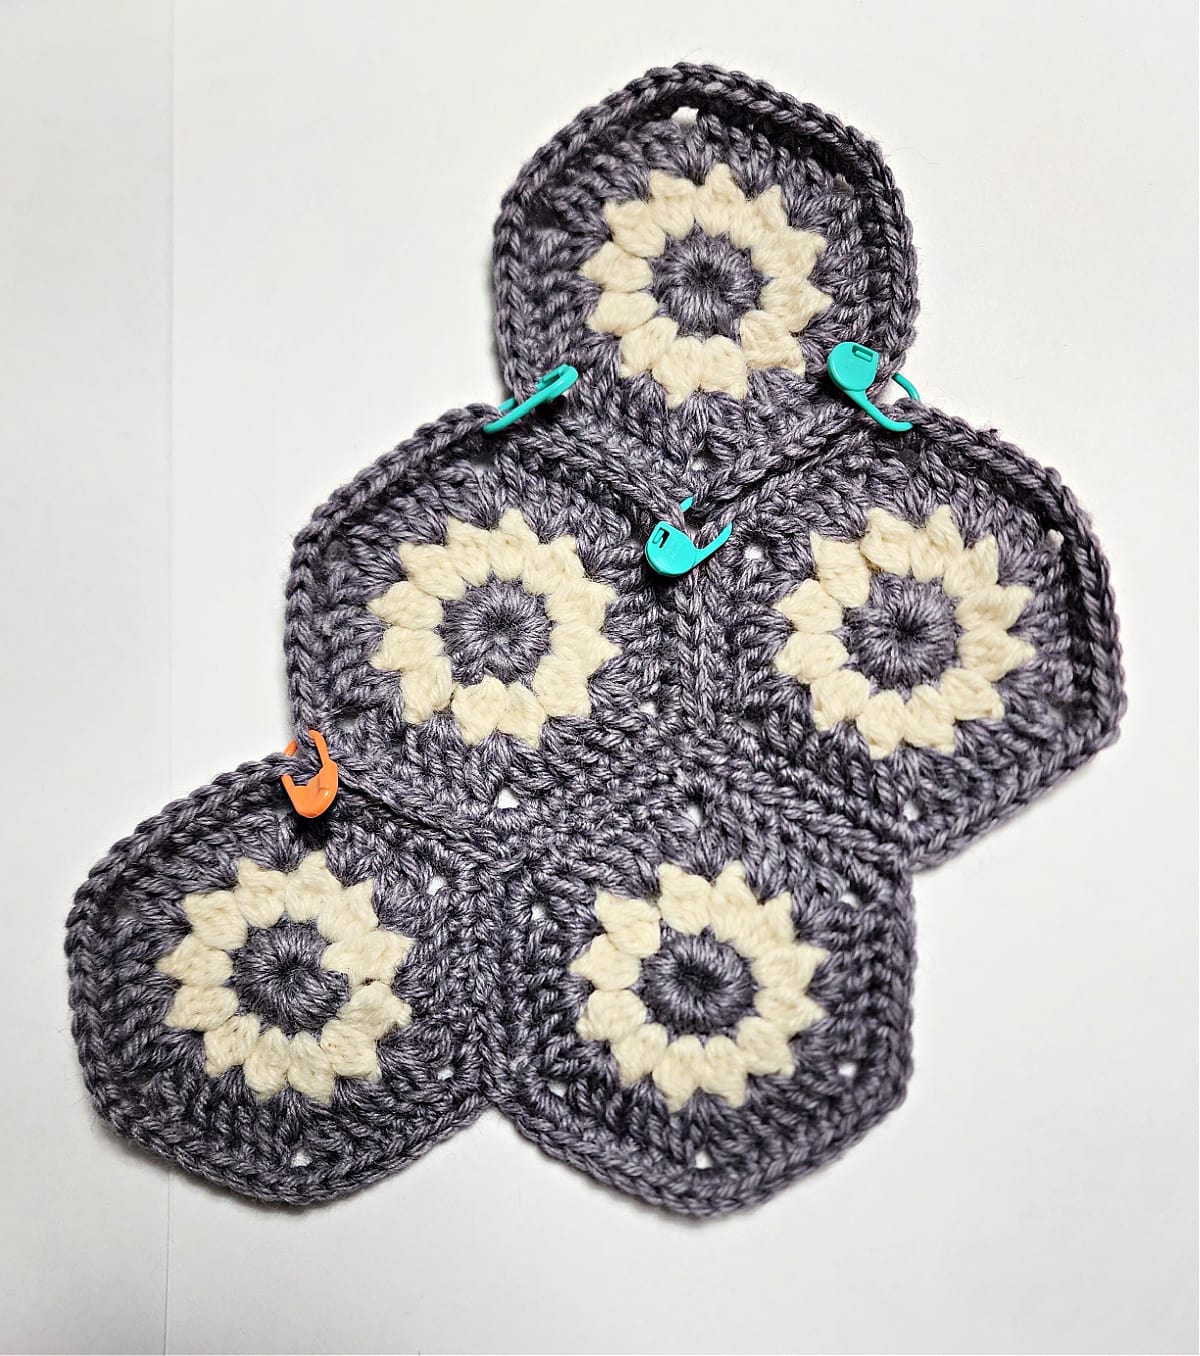 Joining crochet hexagons with whipstitches.